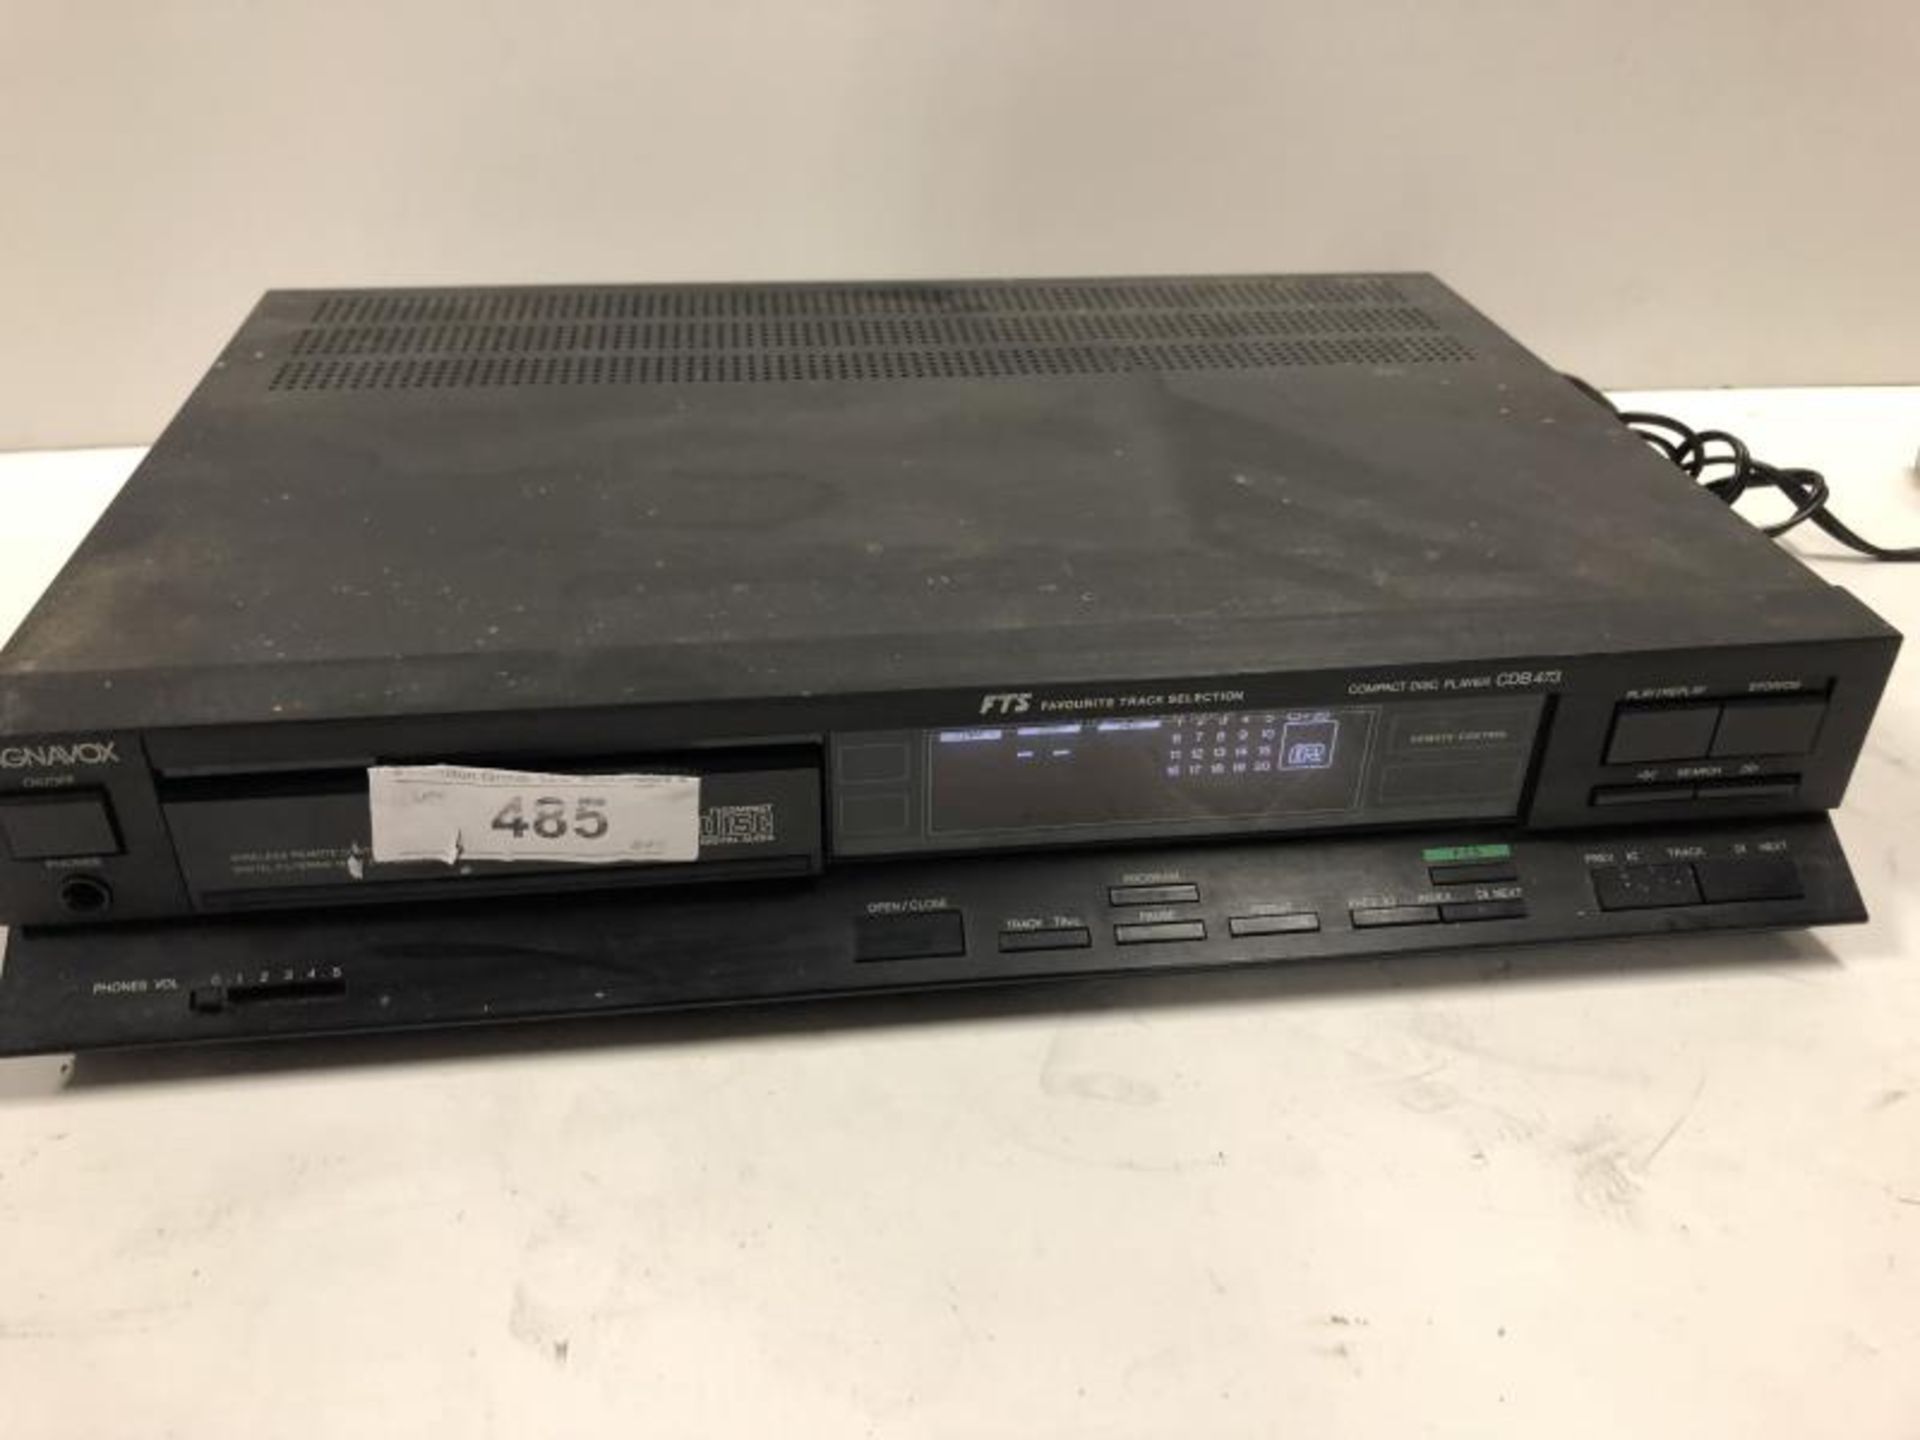 Magnavox Compact Disc Player, CDB473, tested - powers up